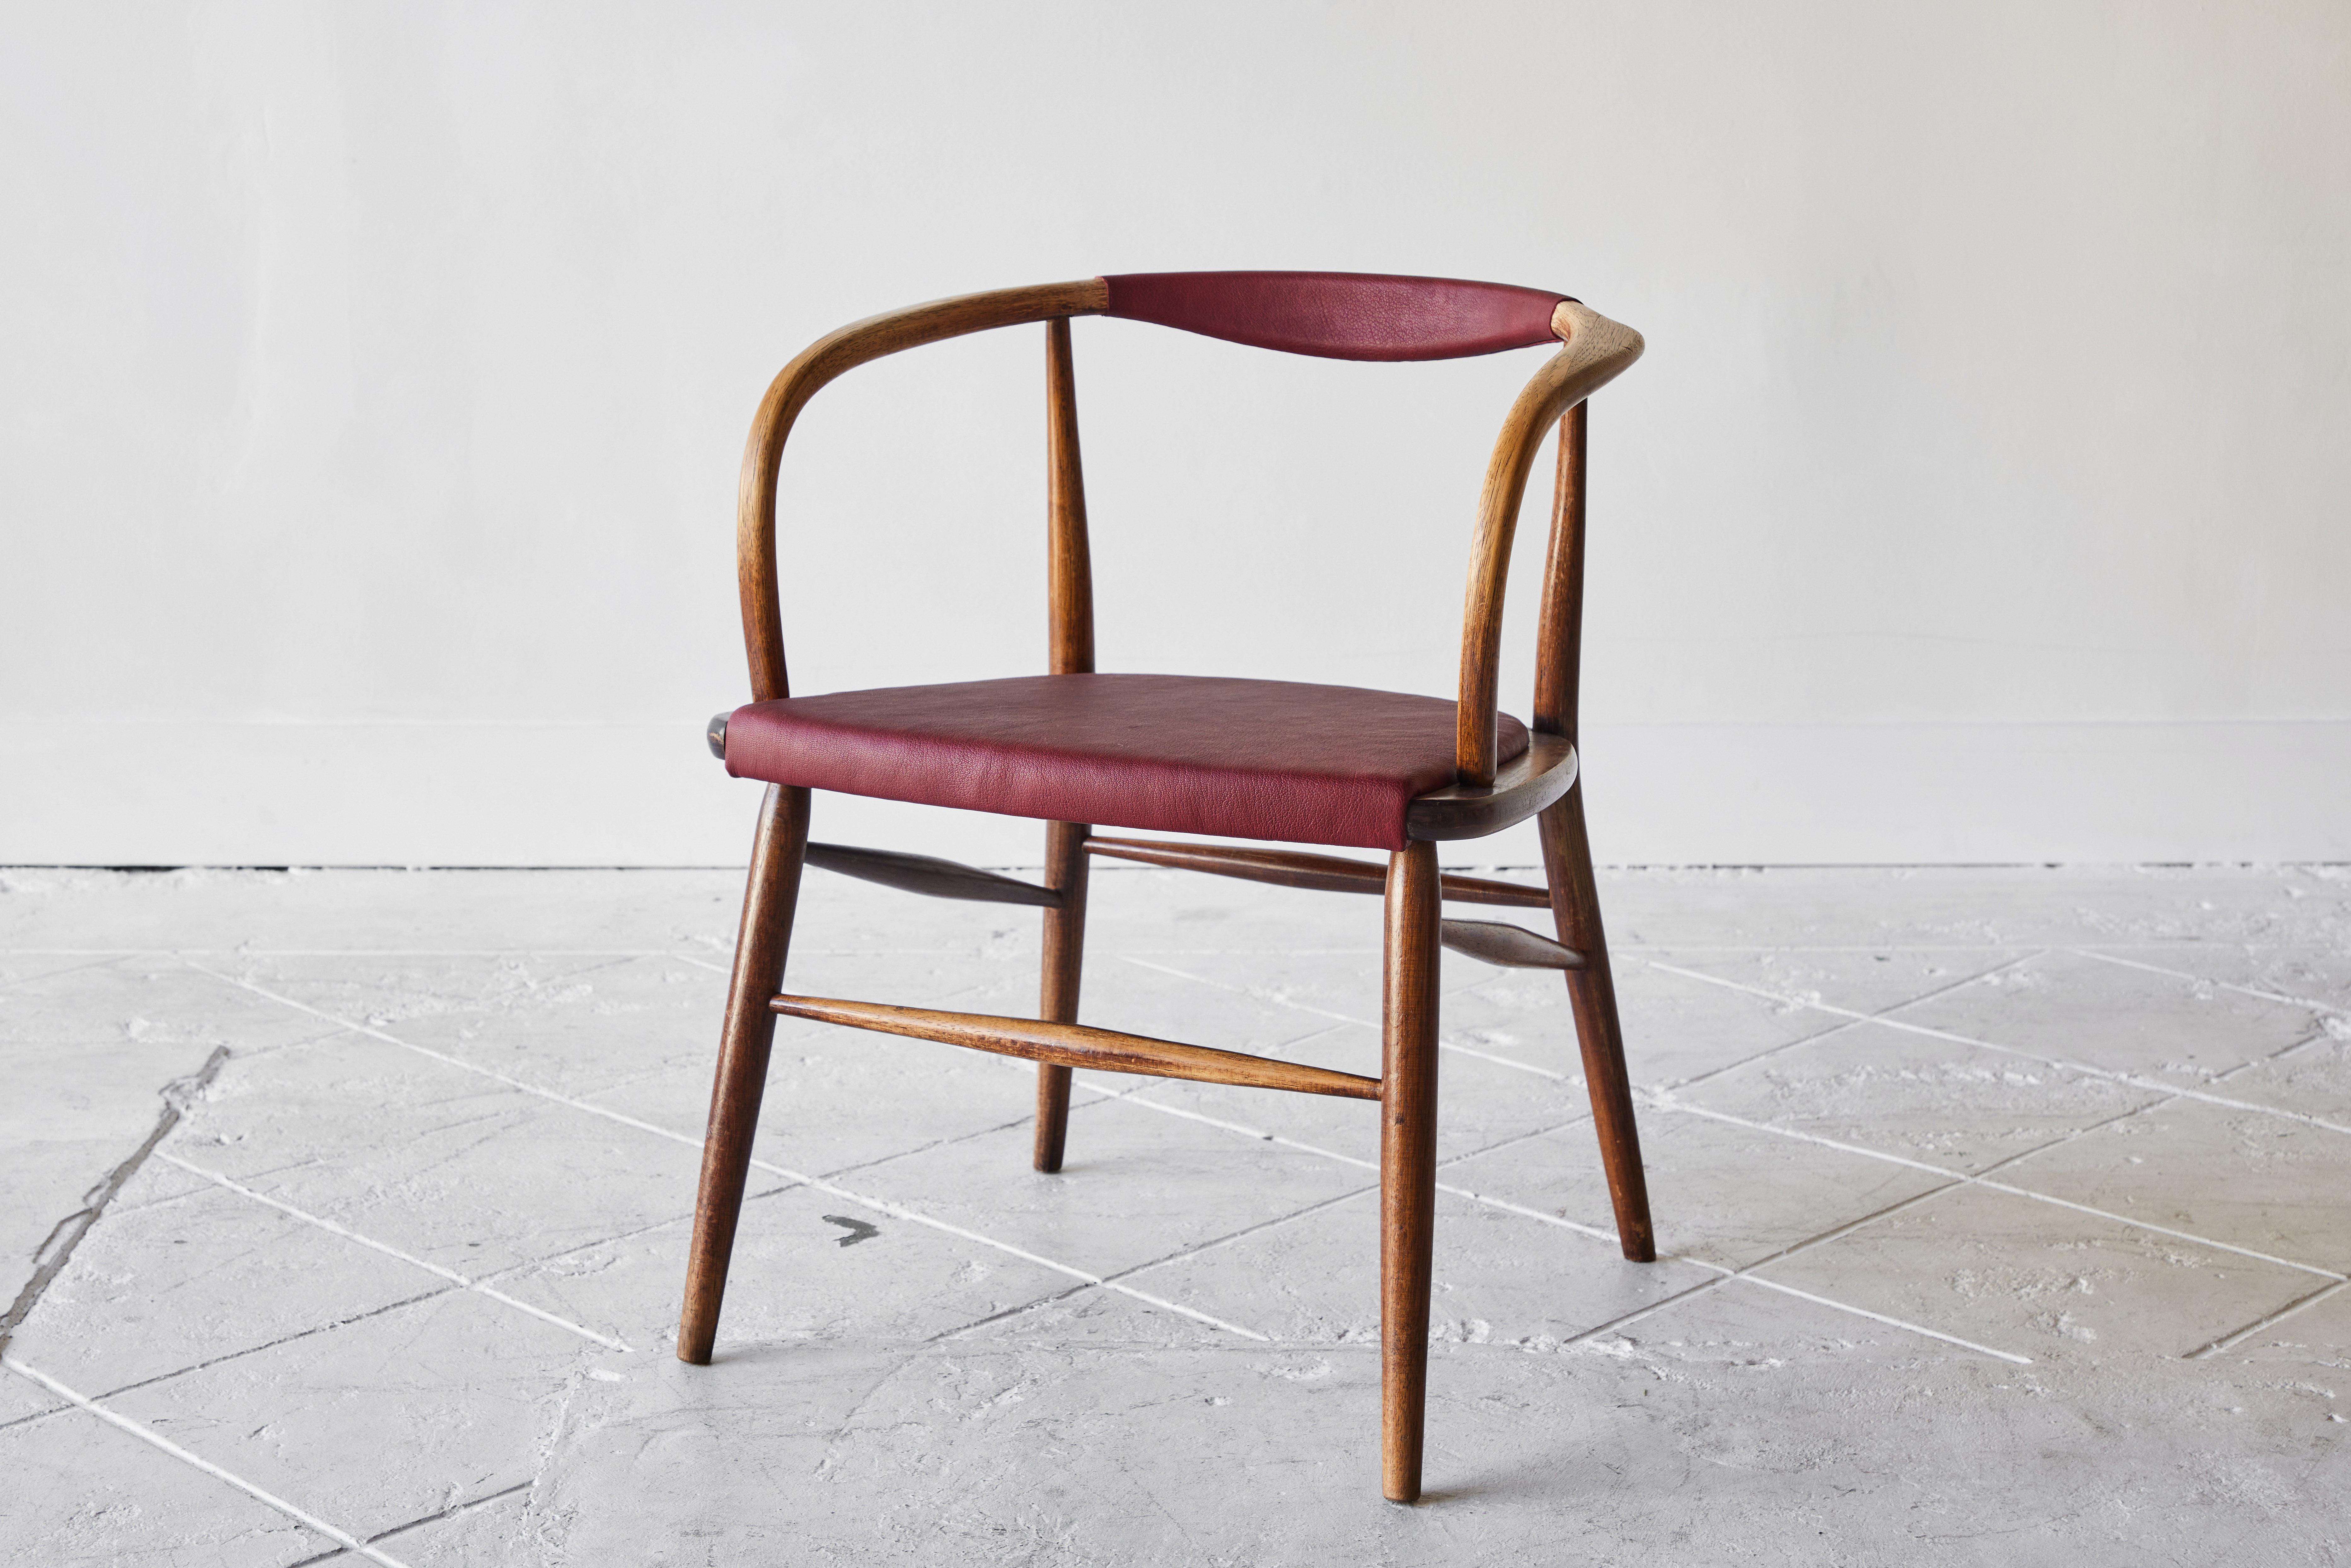 19th Century Bentwood Armchair Attributed to Thonet with Leather Seat